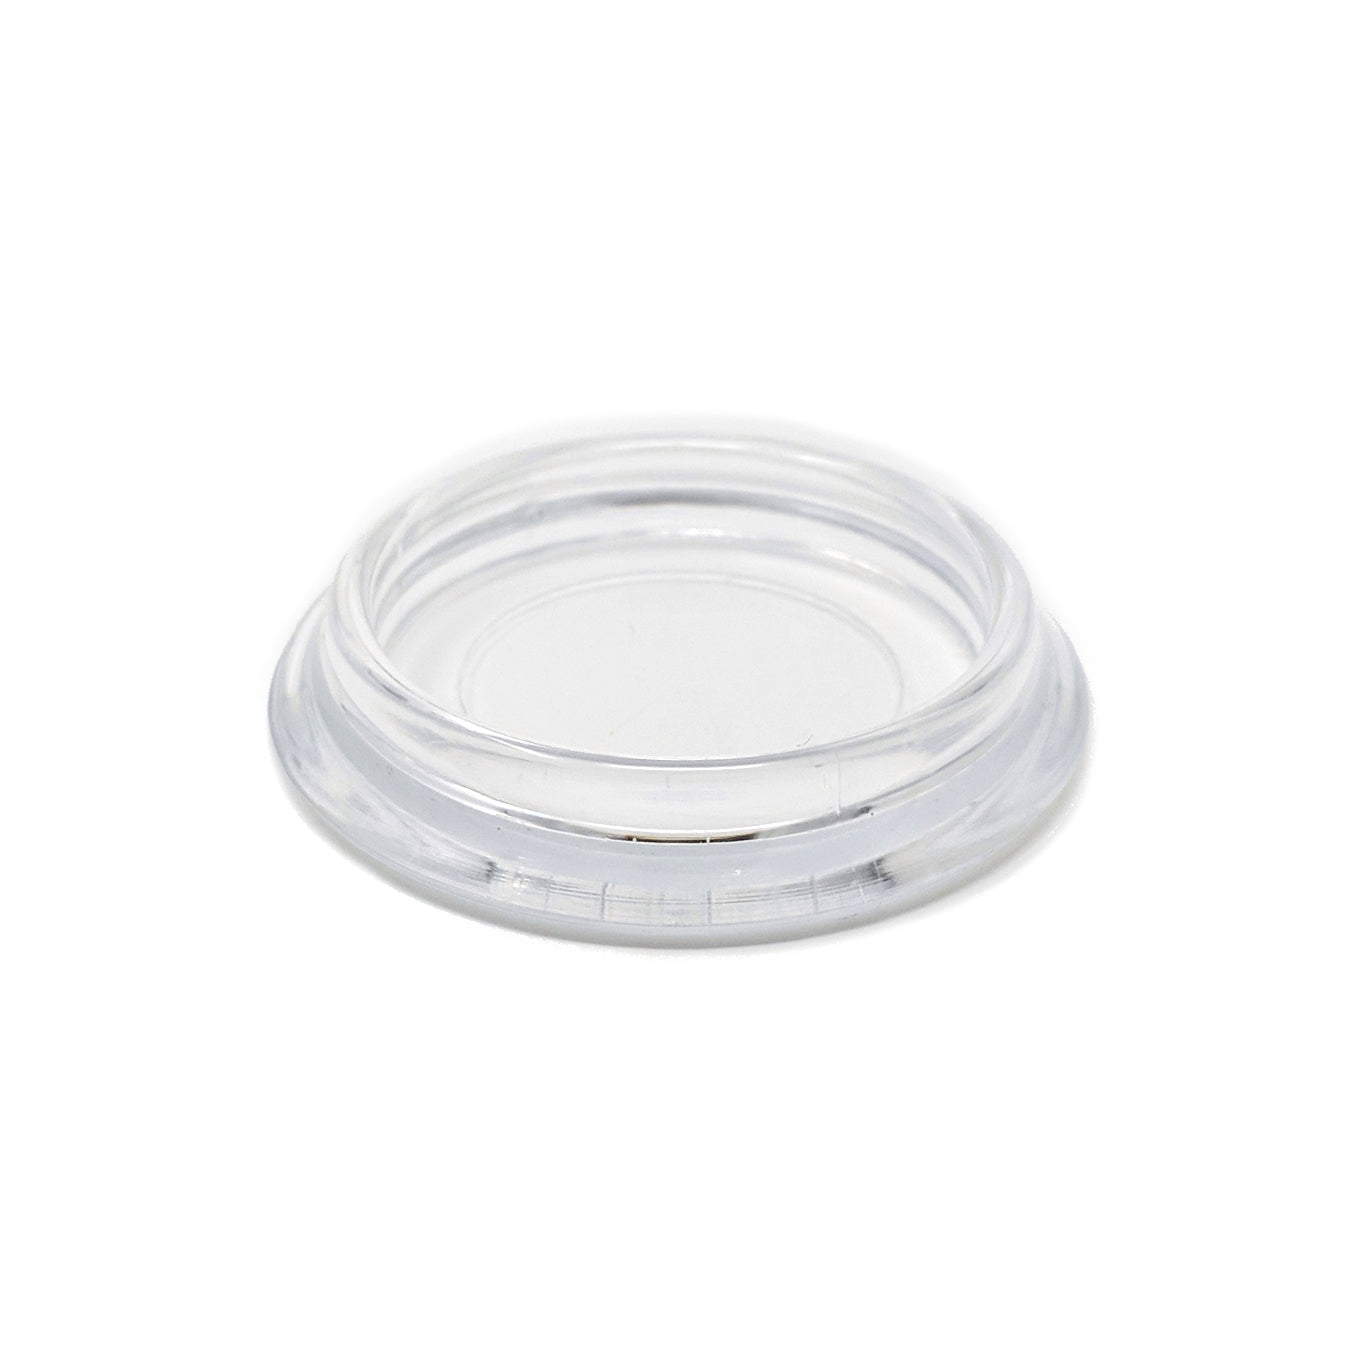 40mm Clear Round Furniture Leg Cups Floor Carpet Protector - Made in Germany - Keay Vital Parts